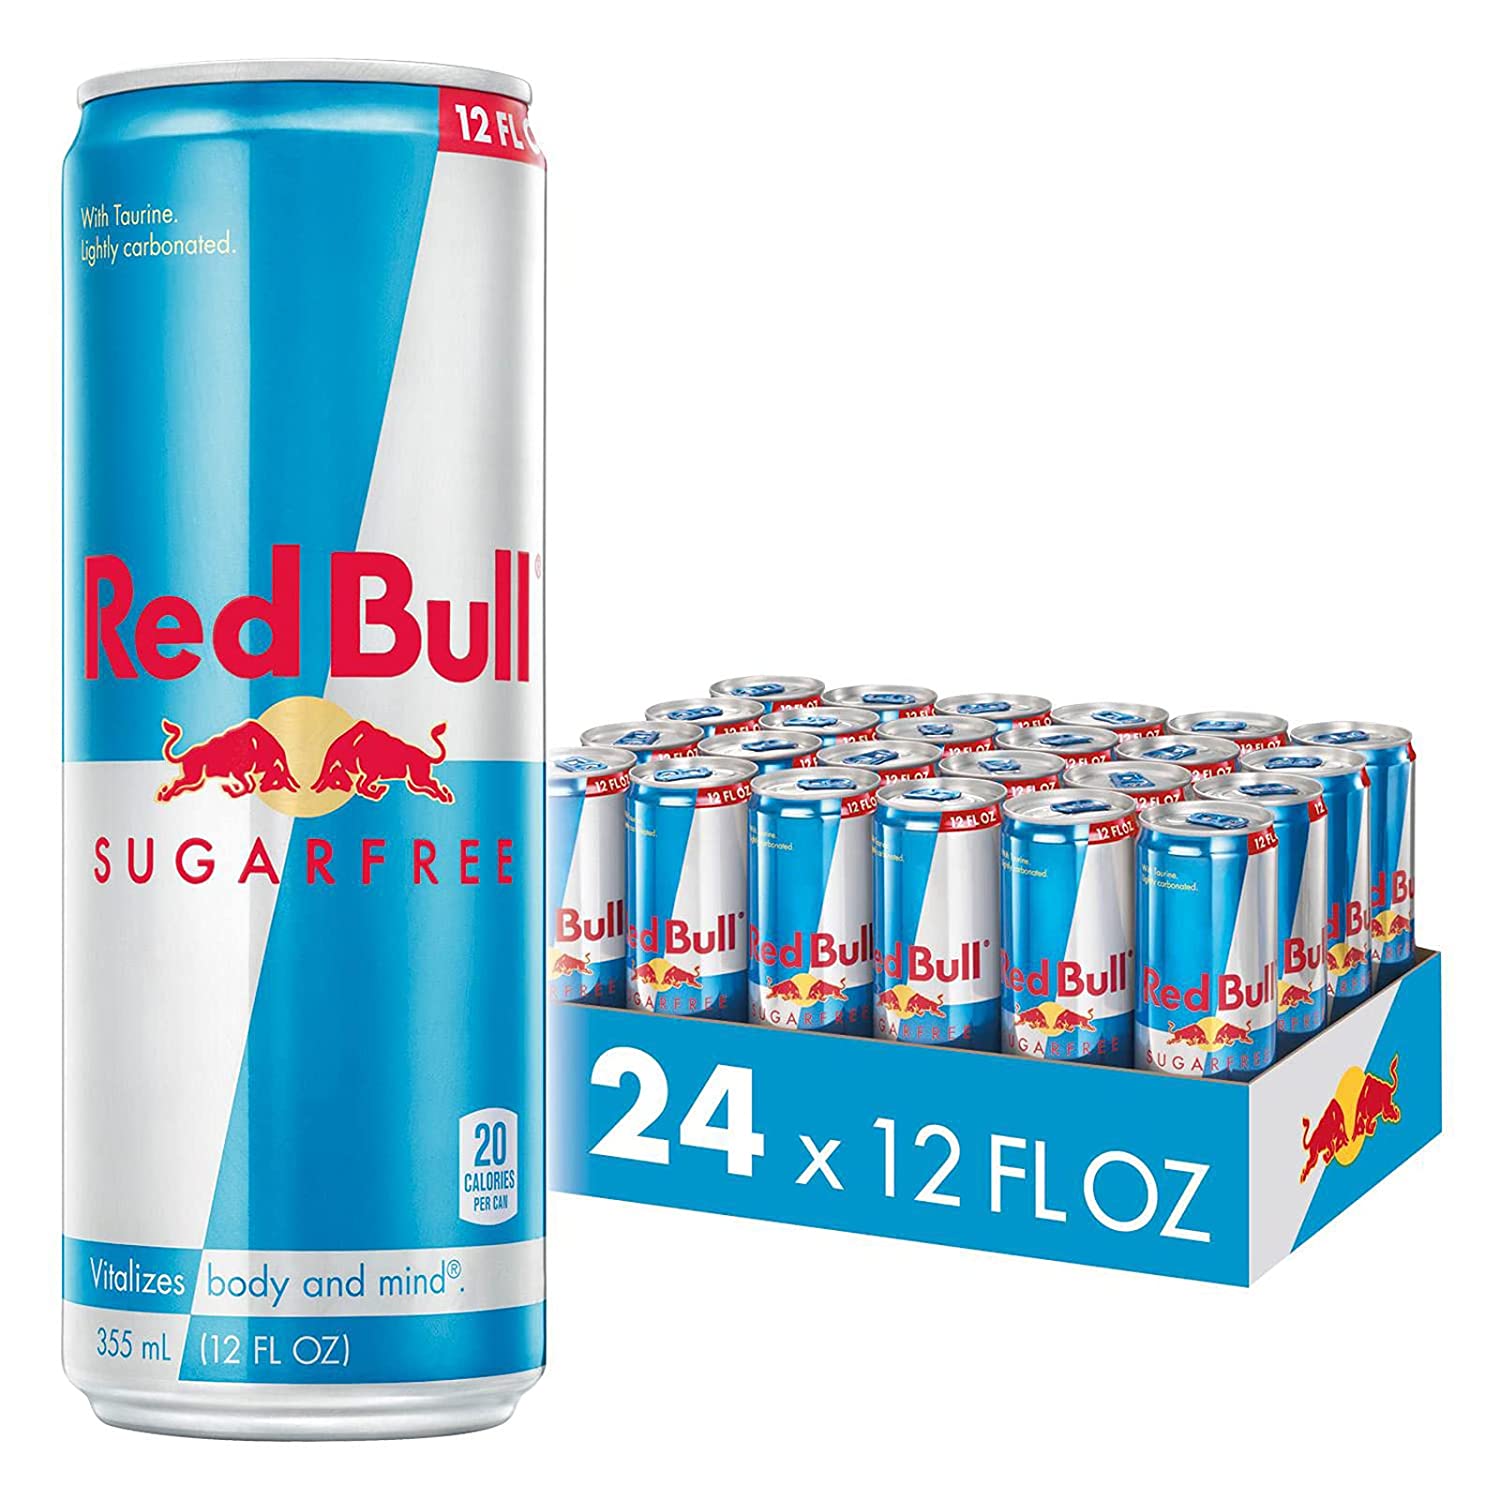 Red Bull Energy Drink, Sugar Free, 12 Fl Oz (24 Pack)Normal purchase $33.96 With S&S $32.26